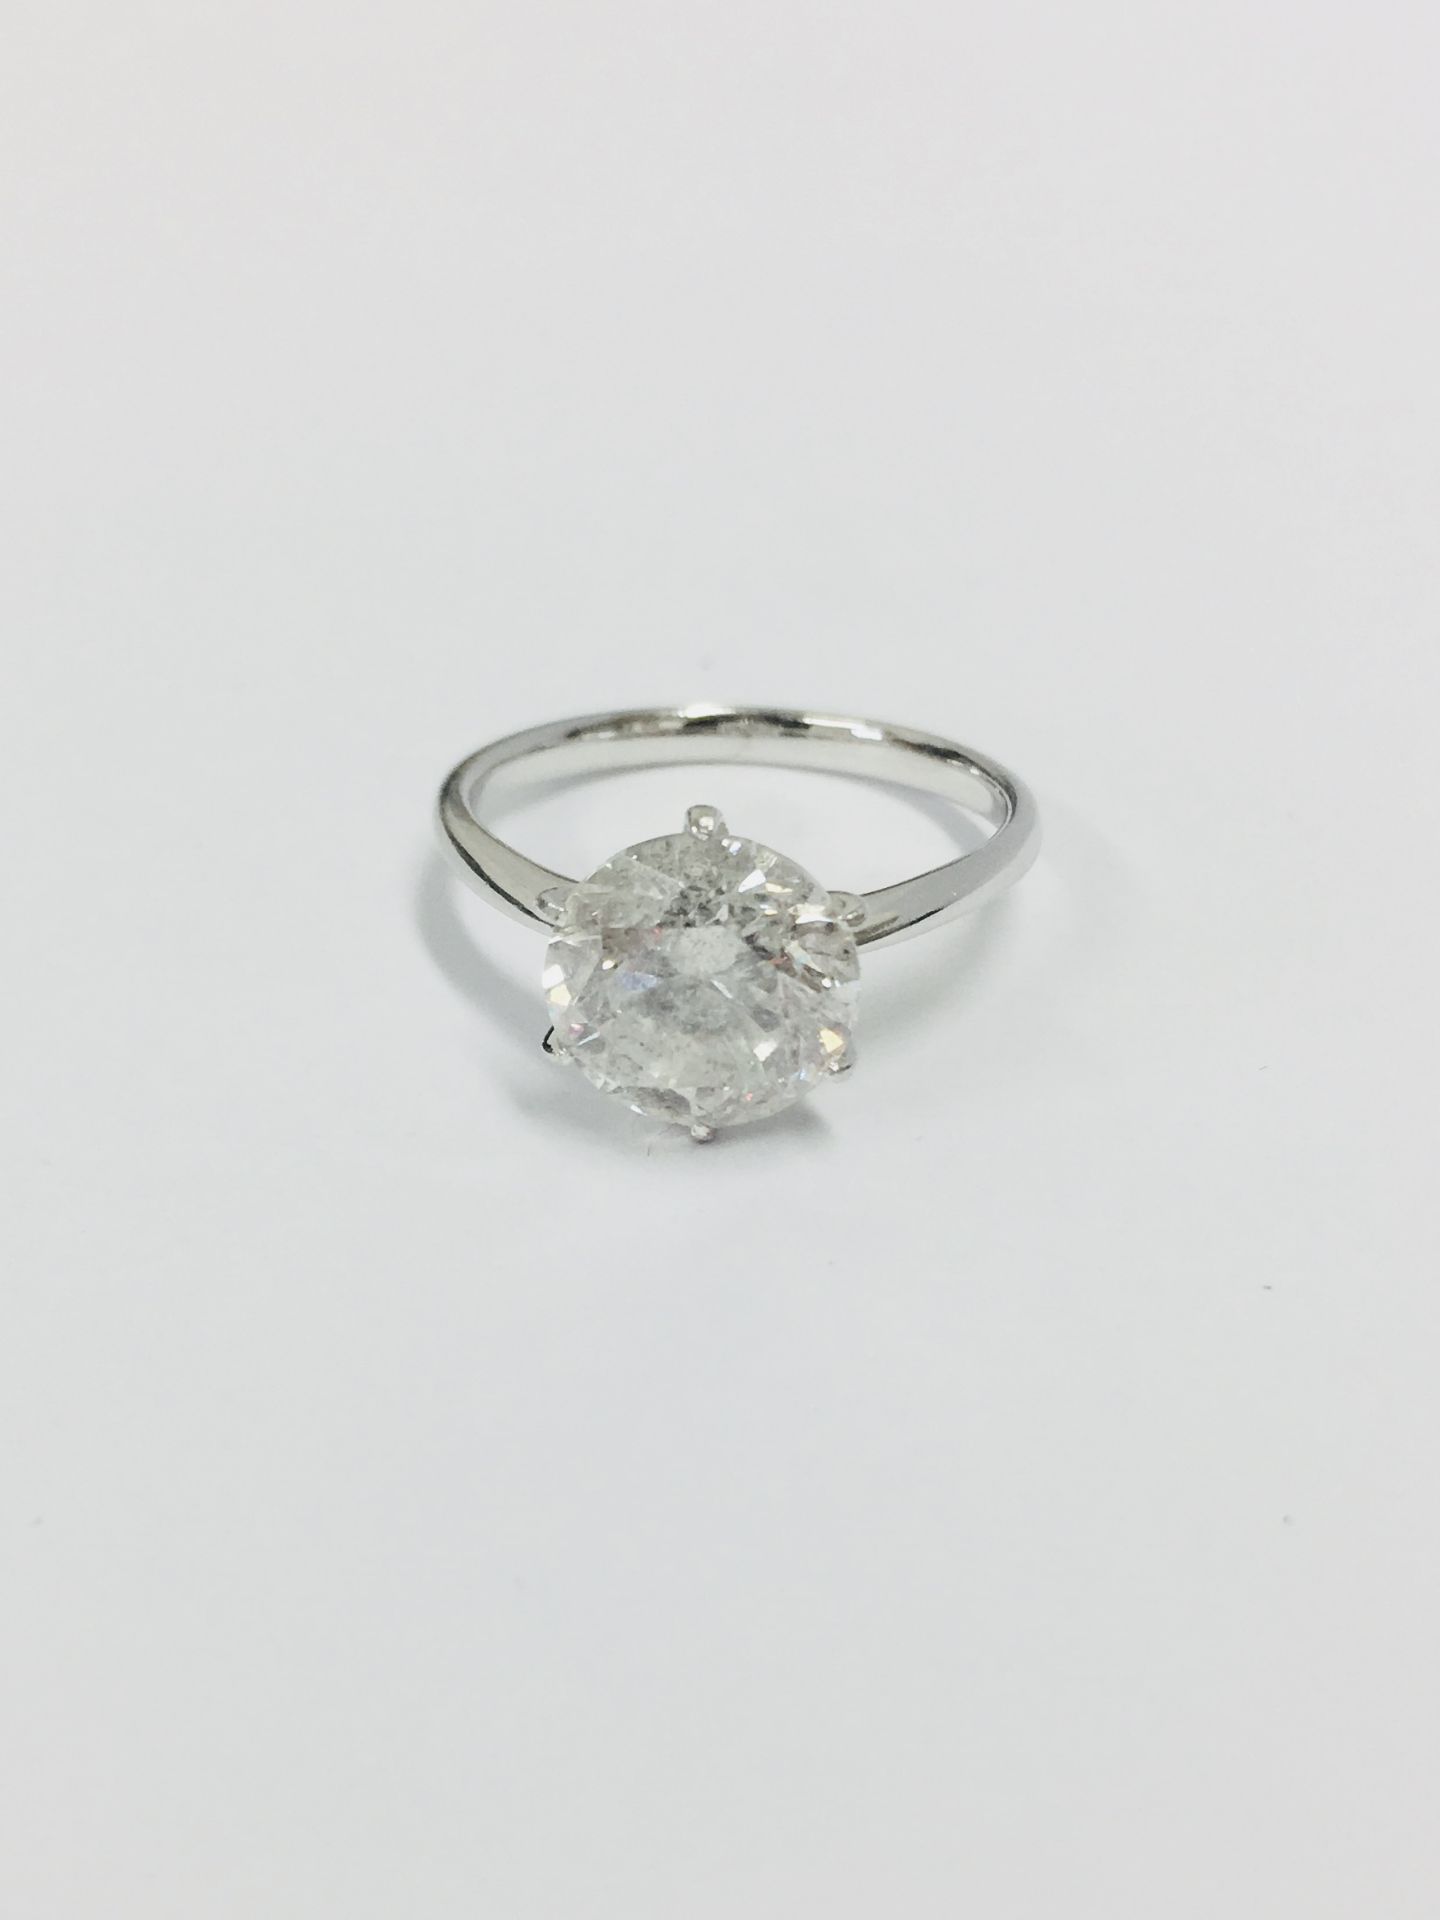 2.04ct diamond solitaire ring set in 18ct white gold. H colour and I1 clarity. High 4 claw